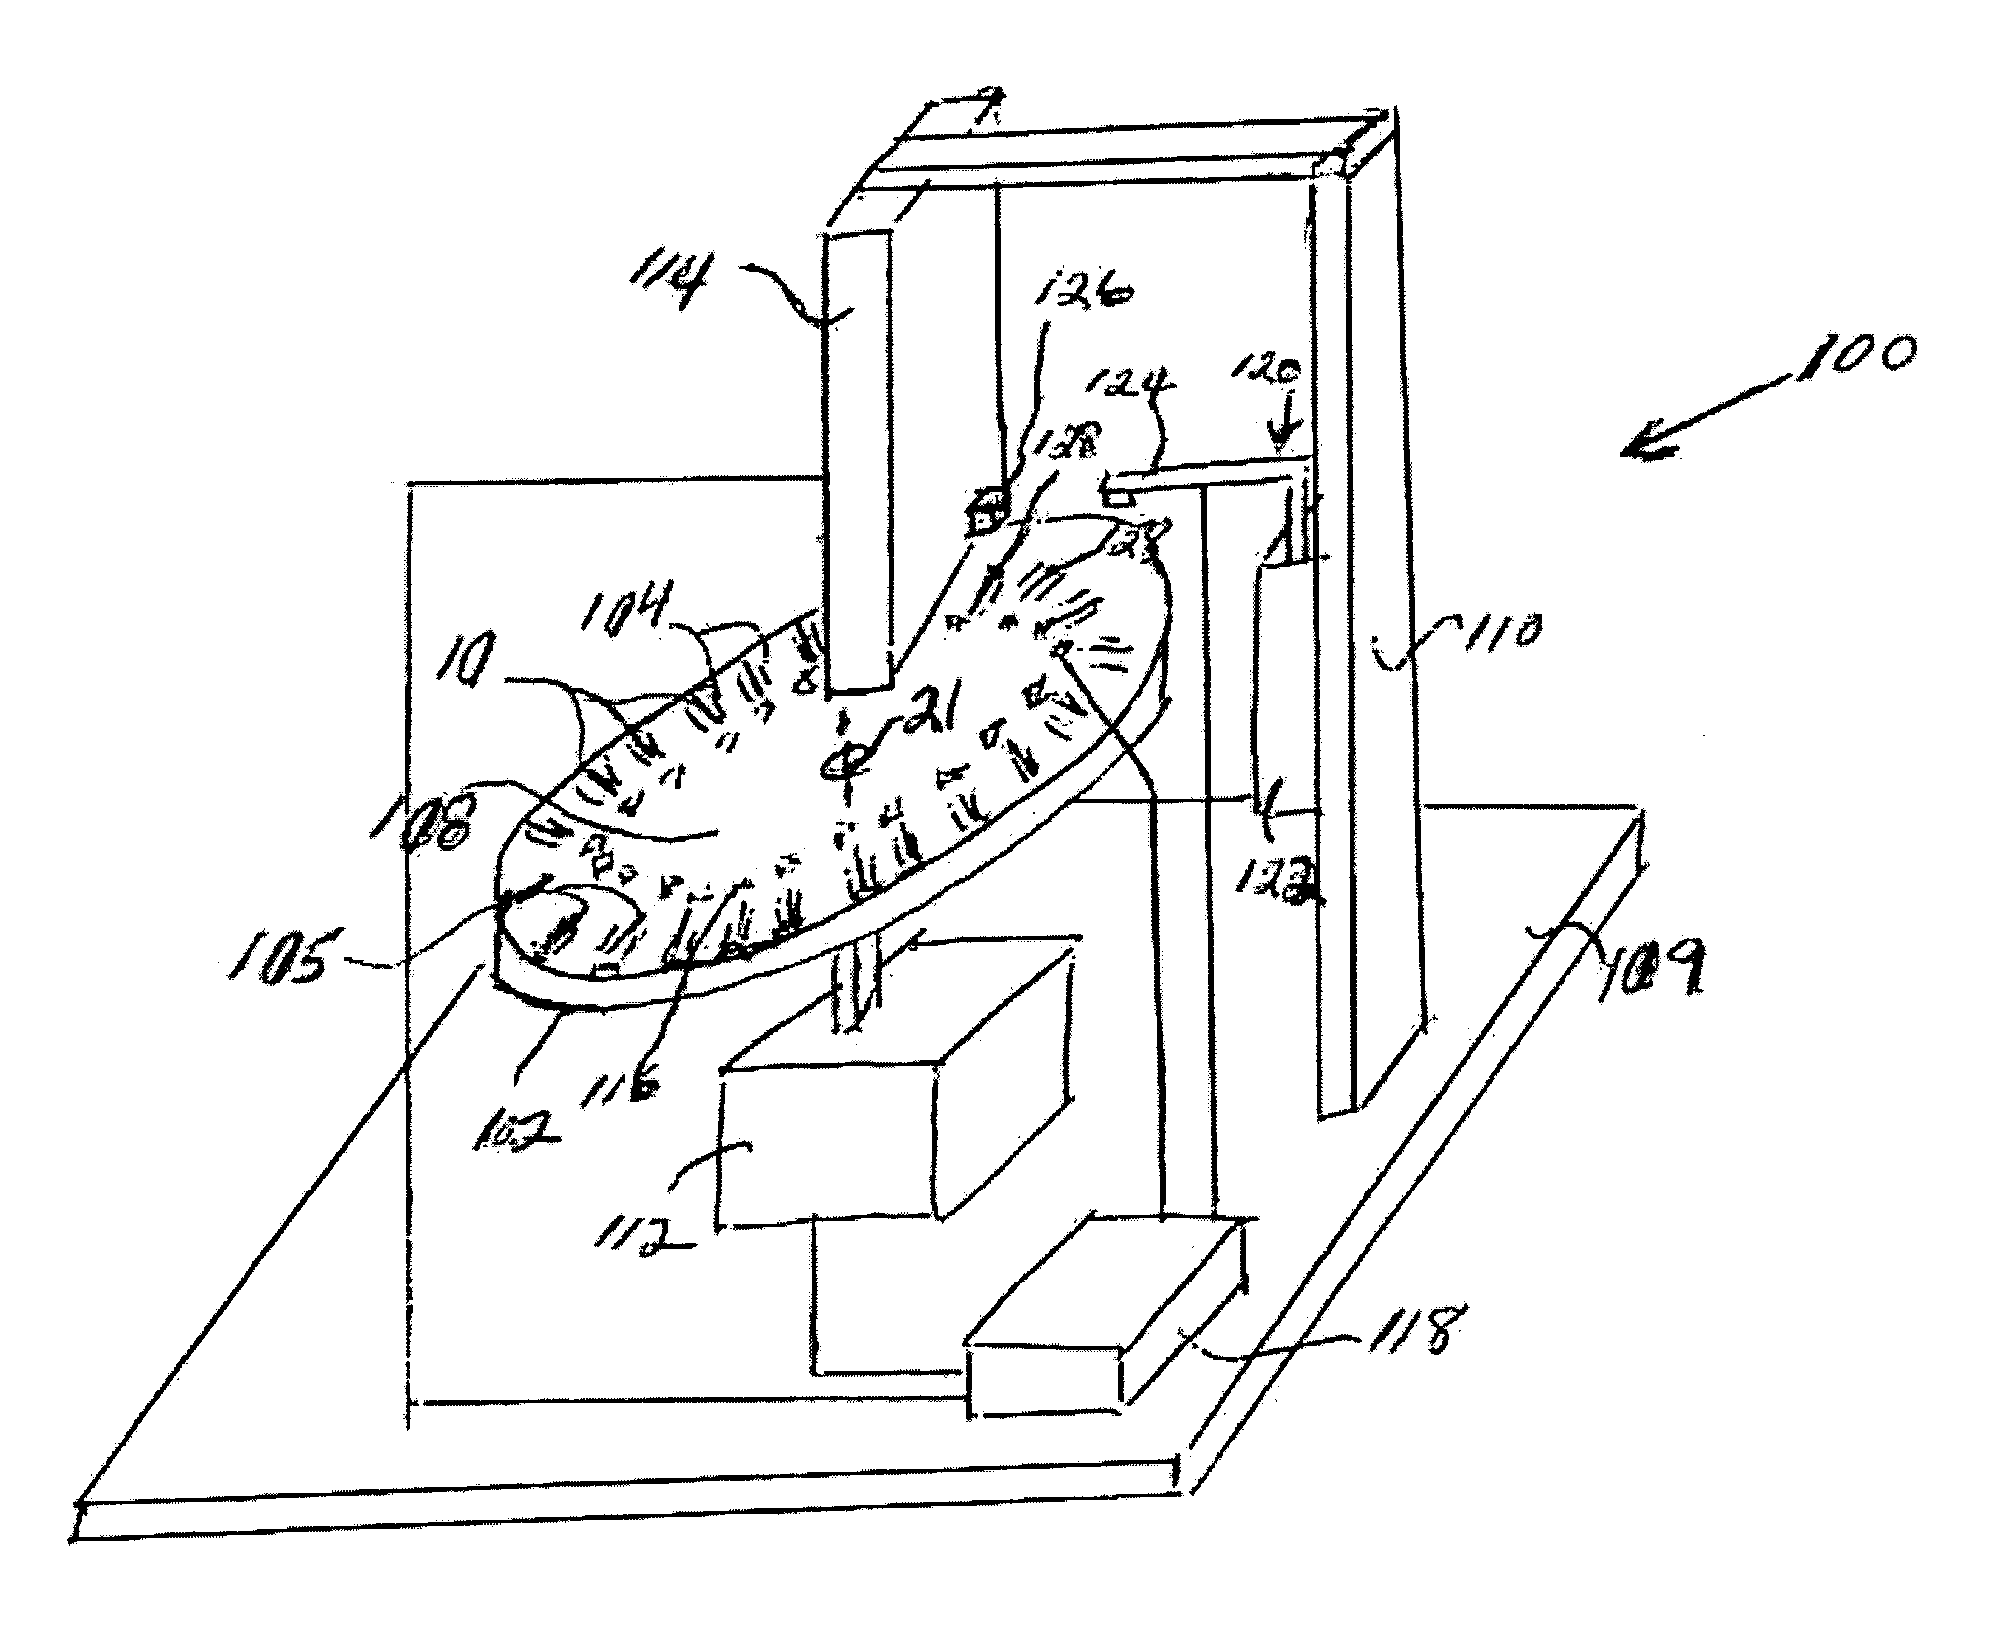 Methods and apparatus for mixing of liquids